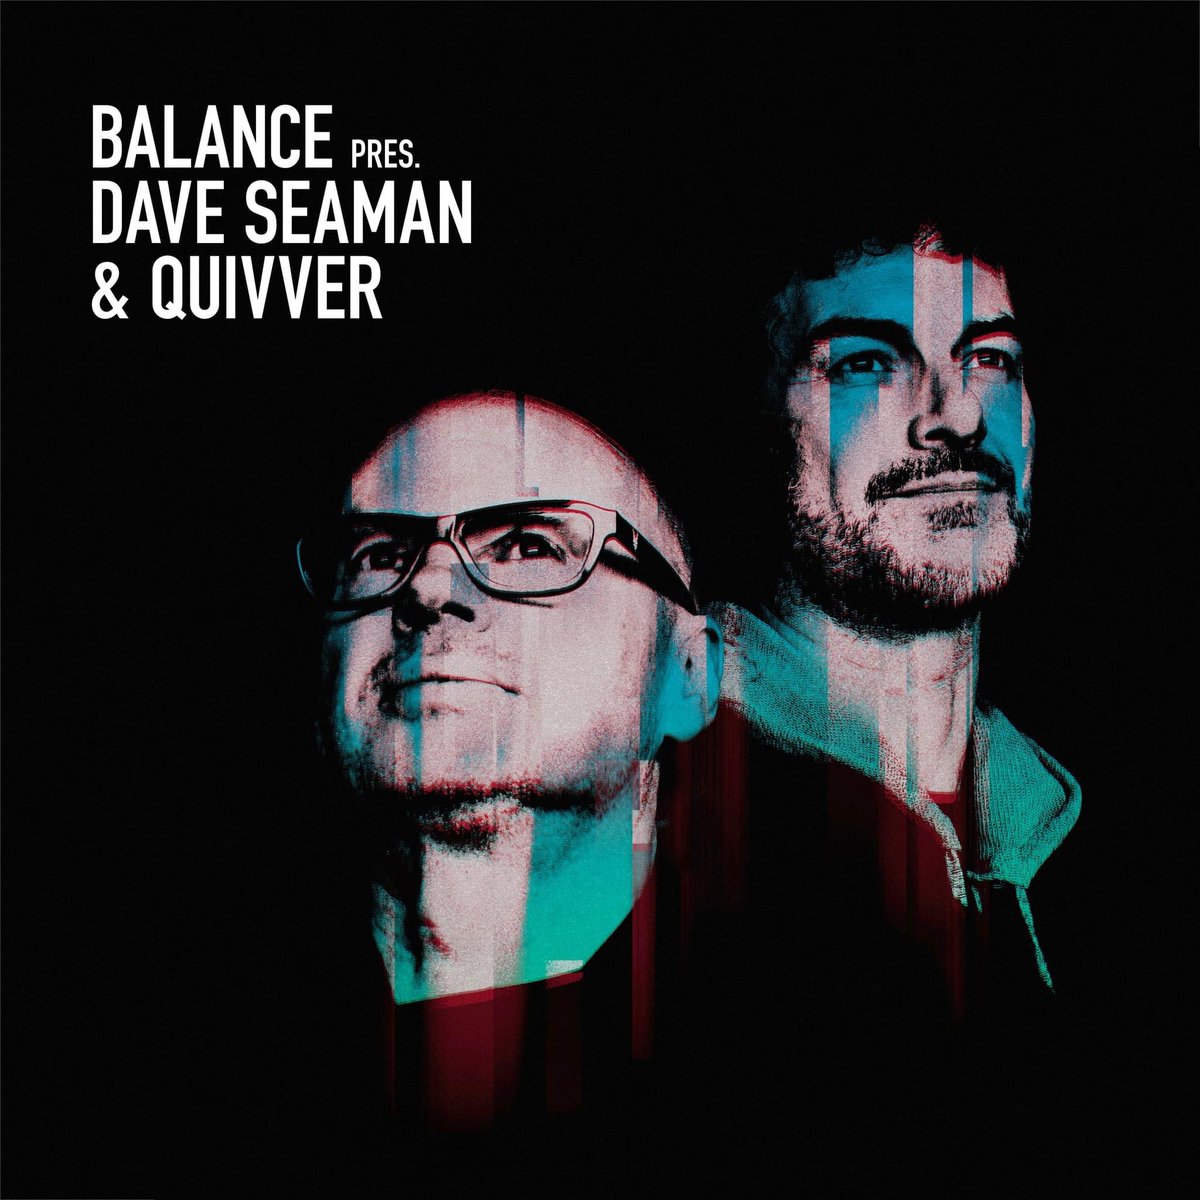 Excited to announce that we have an exclusive track 'Other Sounds' including a Circulation remix on this legendary series of compilations by Balance Series 🙃🧲 It’s honour to have been selected for this one by @daveseaman & @Quivver - Tnx! 

Pre-order 👉 linktr.ee/balance_music